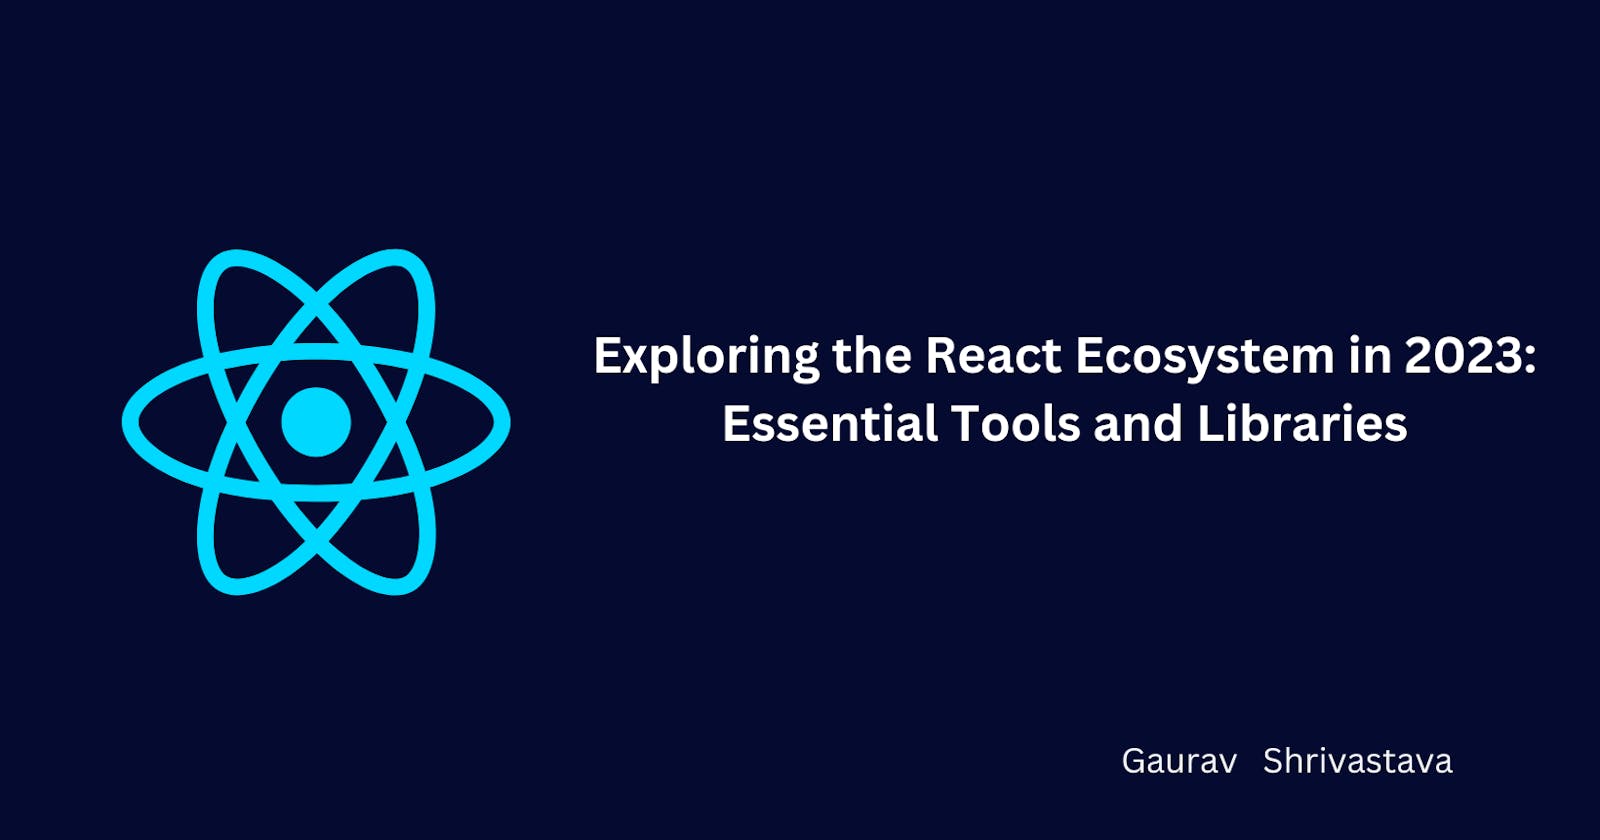 Exploring the React Ecosystem in 2023: Essential Tools and Libraries